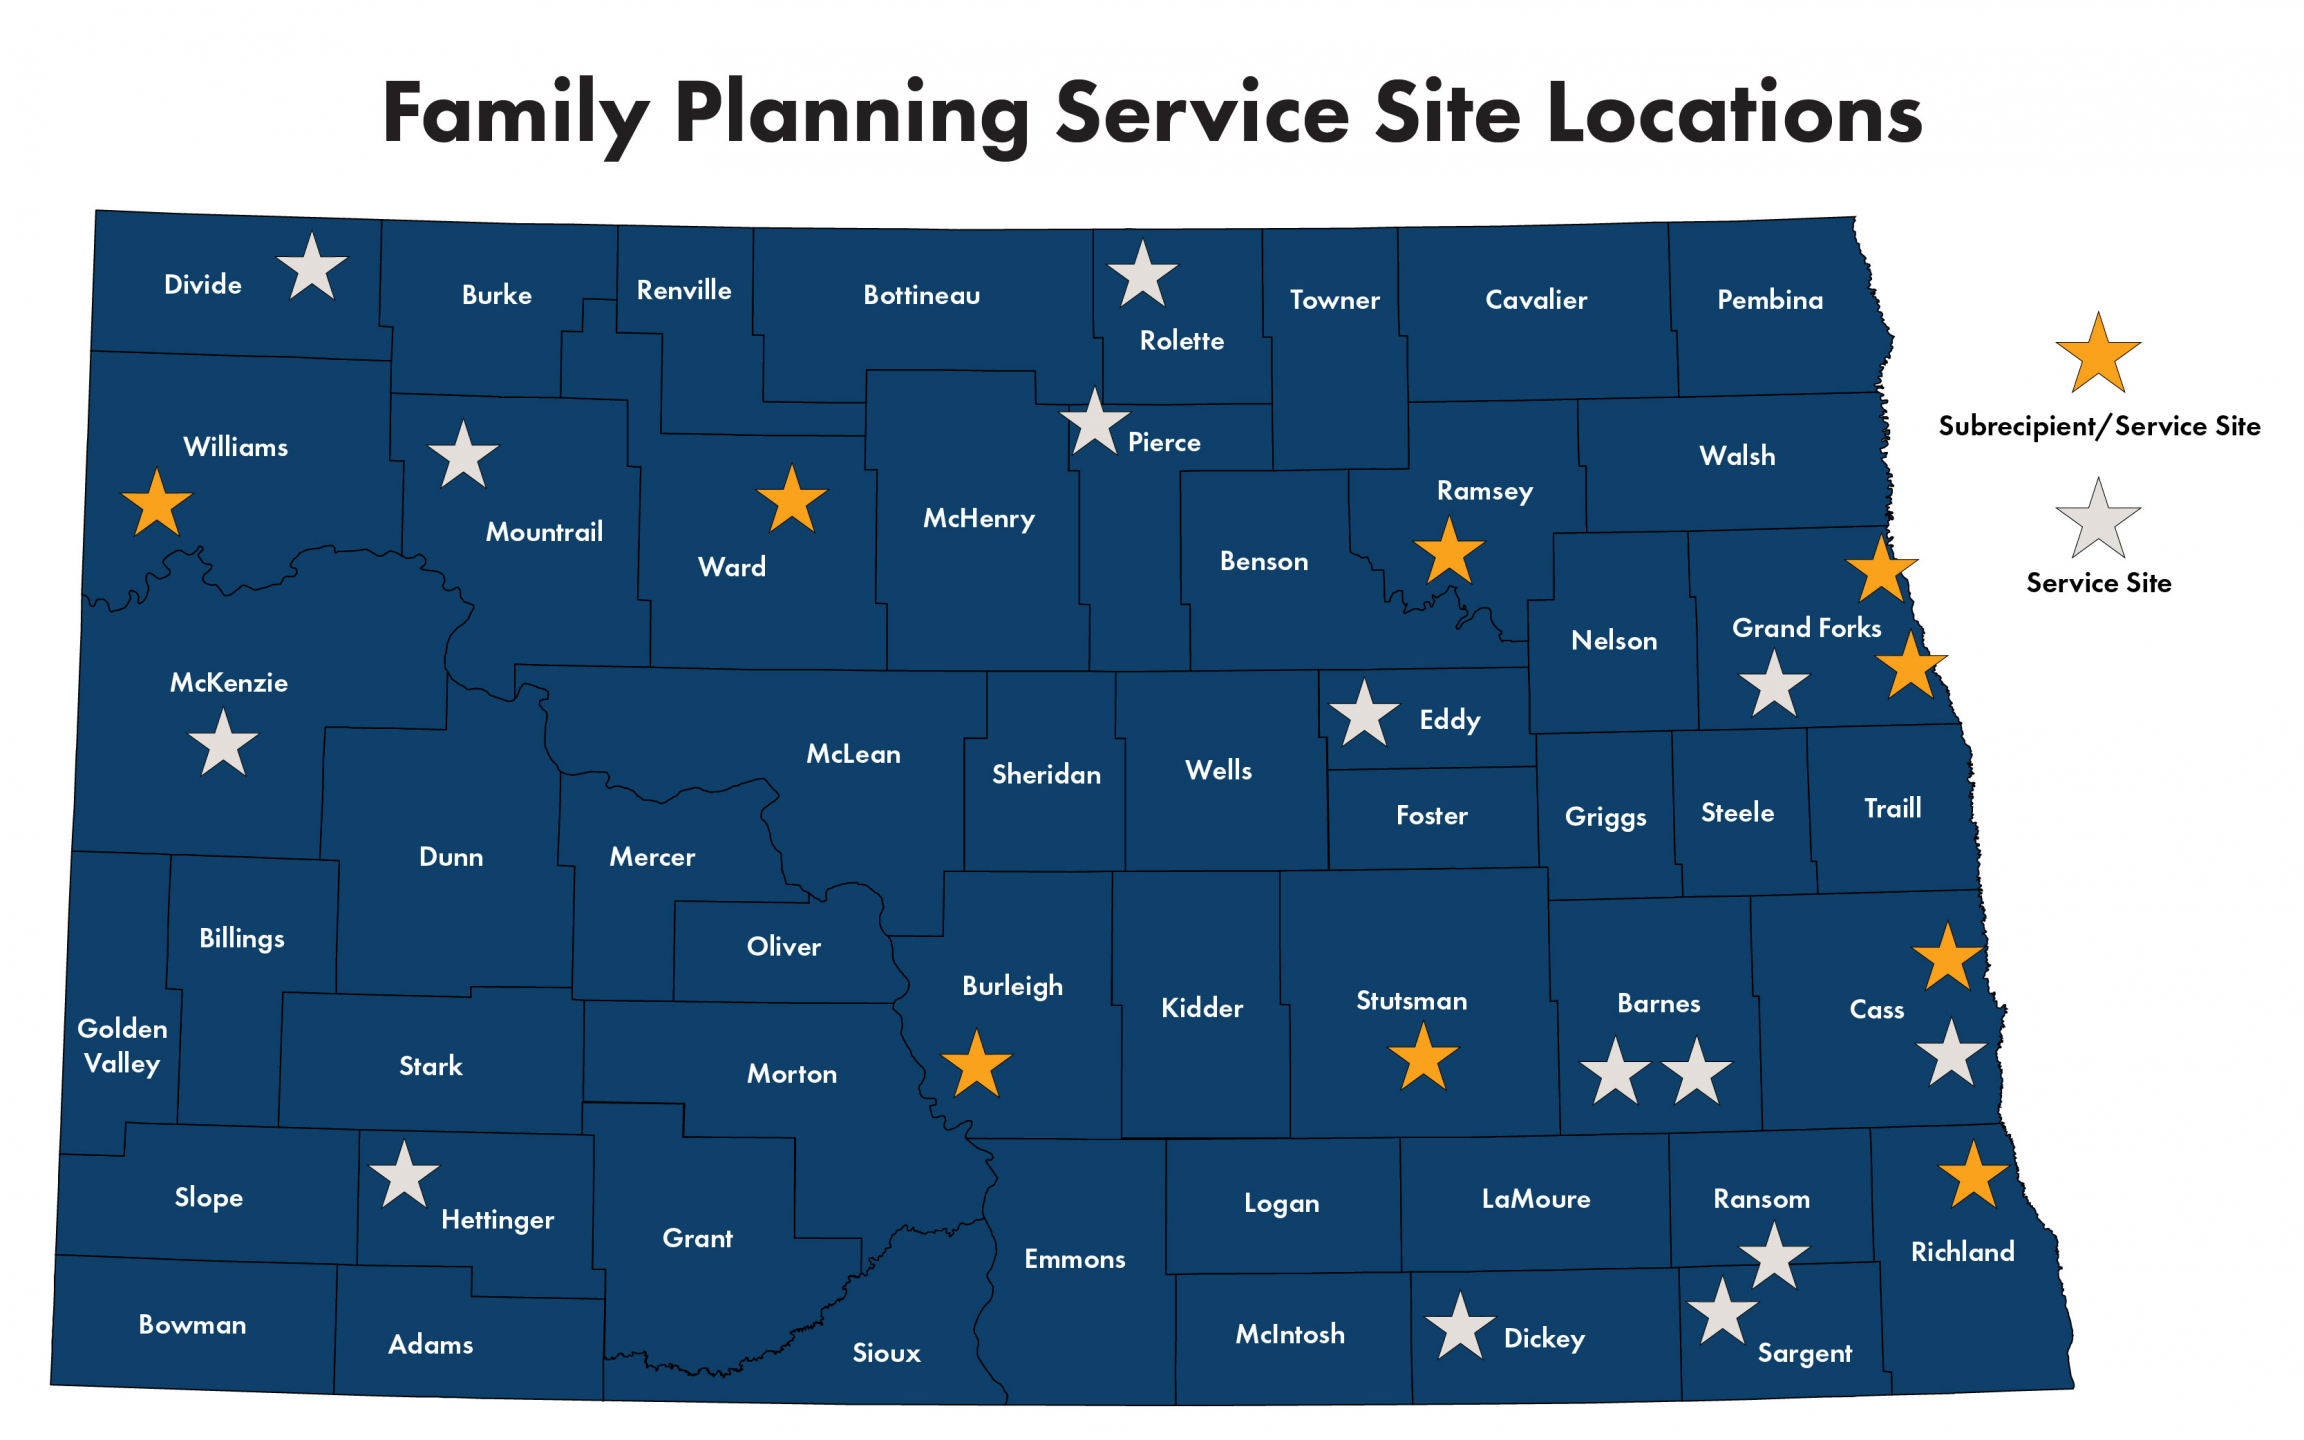 Family Planning Service Site Locations Map